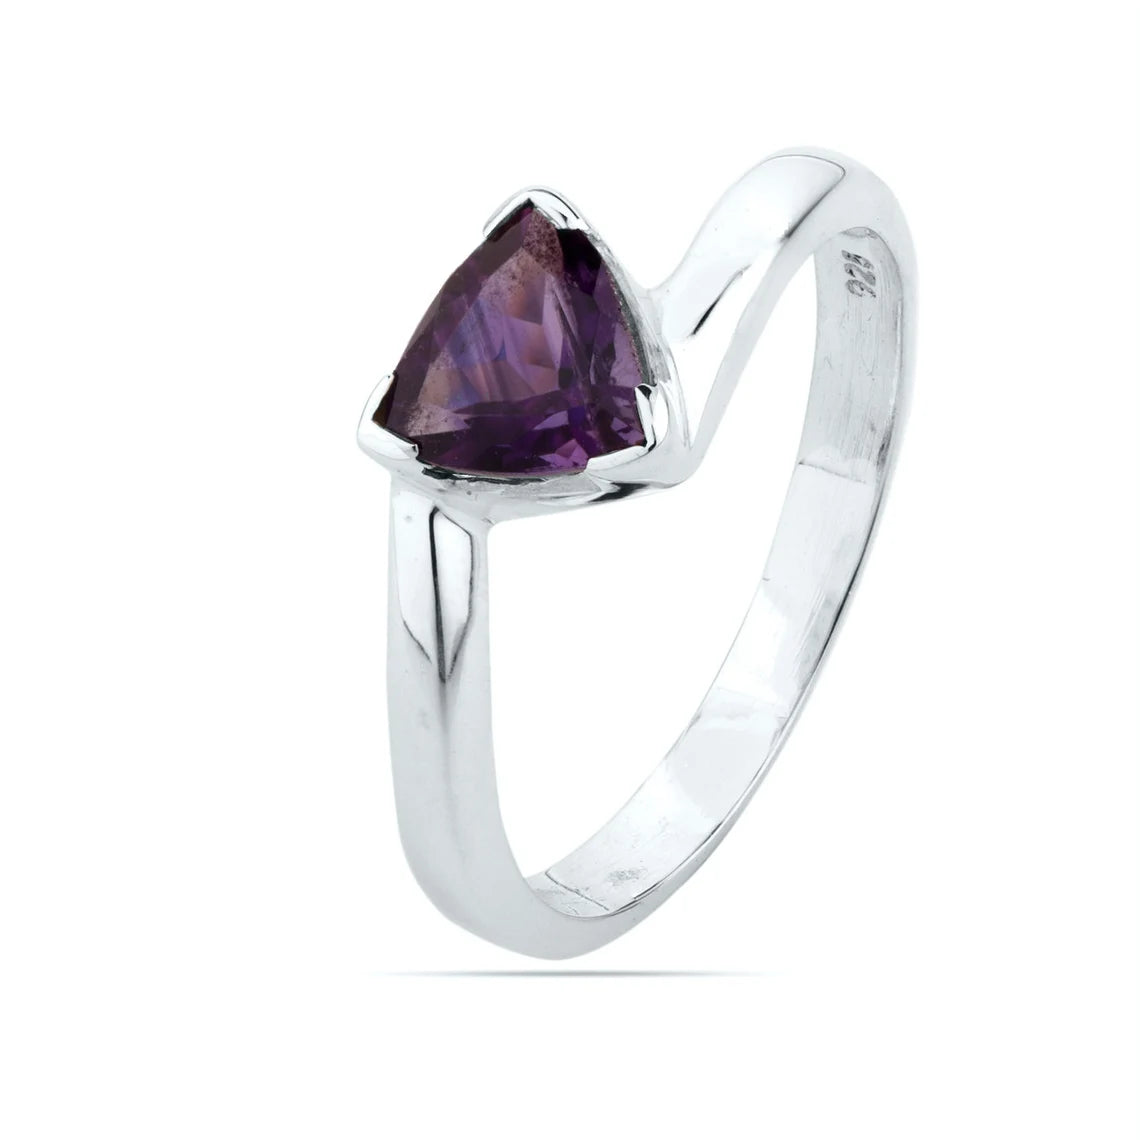 Trillion Amethyst Silver Ring | Sterling Silver Ring| Amethyst Ring Silver | Amethyst Jewelry| Trillion Gemstone Ring | Dainty Stacking Ring